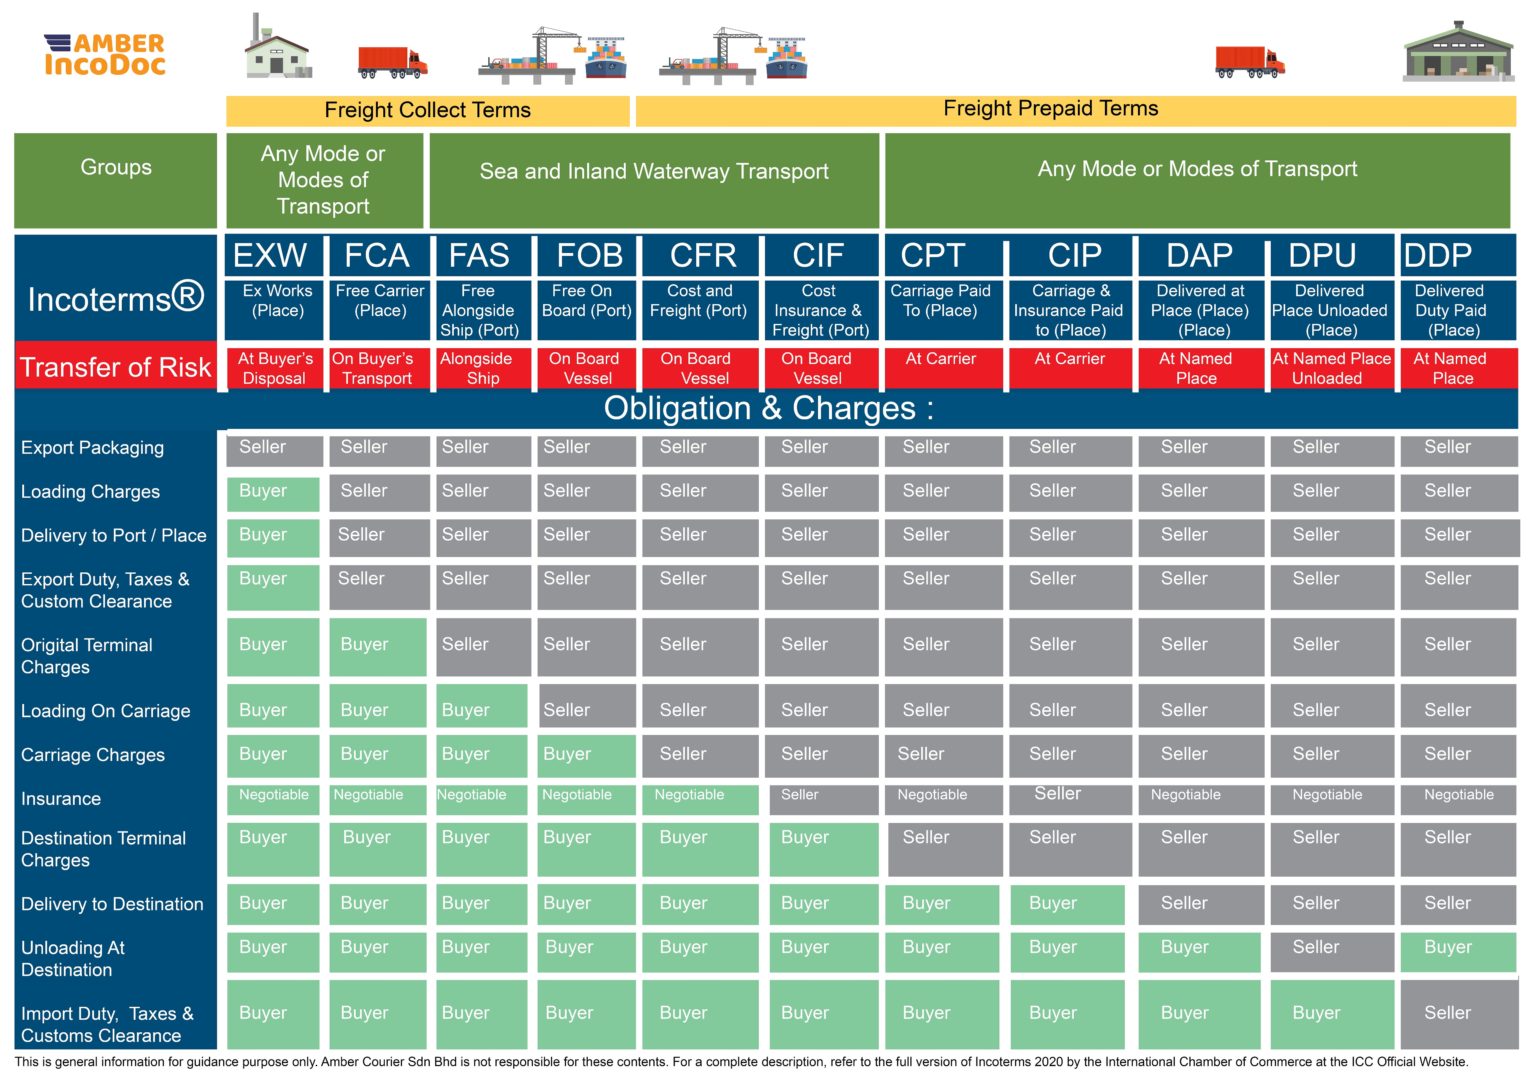 Incoterms® 2020 Amber Courier 5157